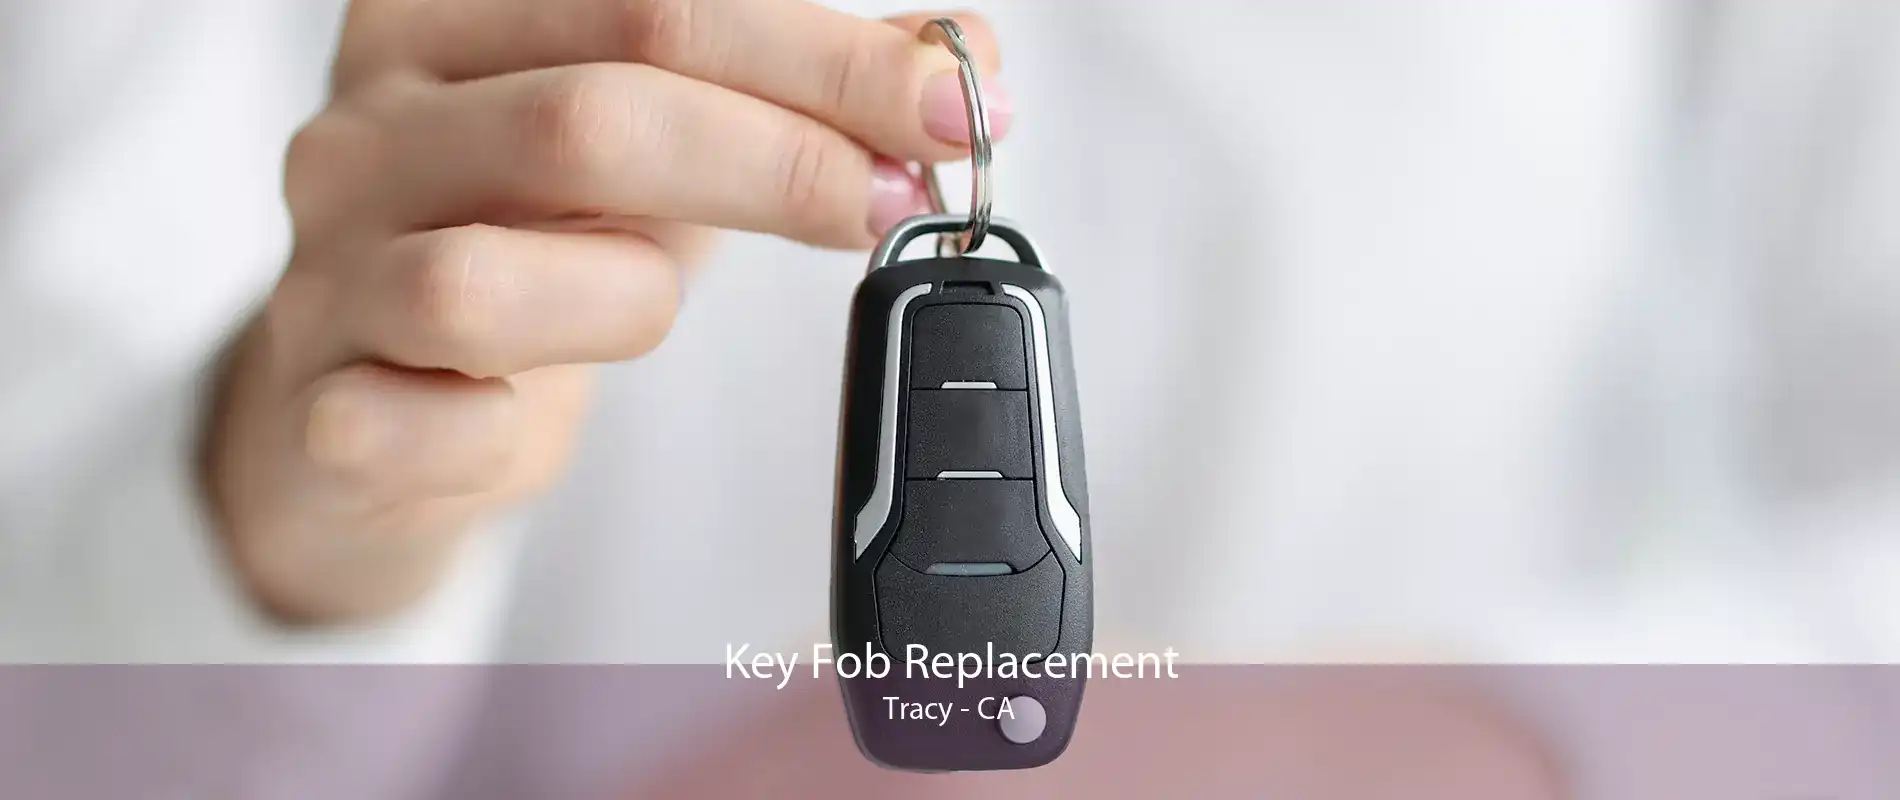 Key Fob Replacement Tracy - CA